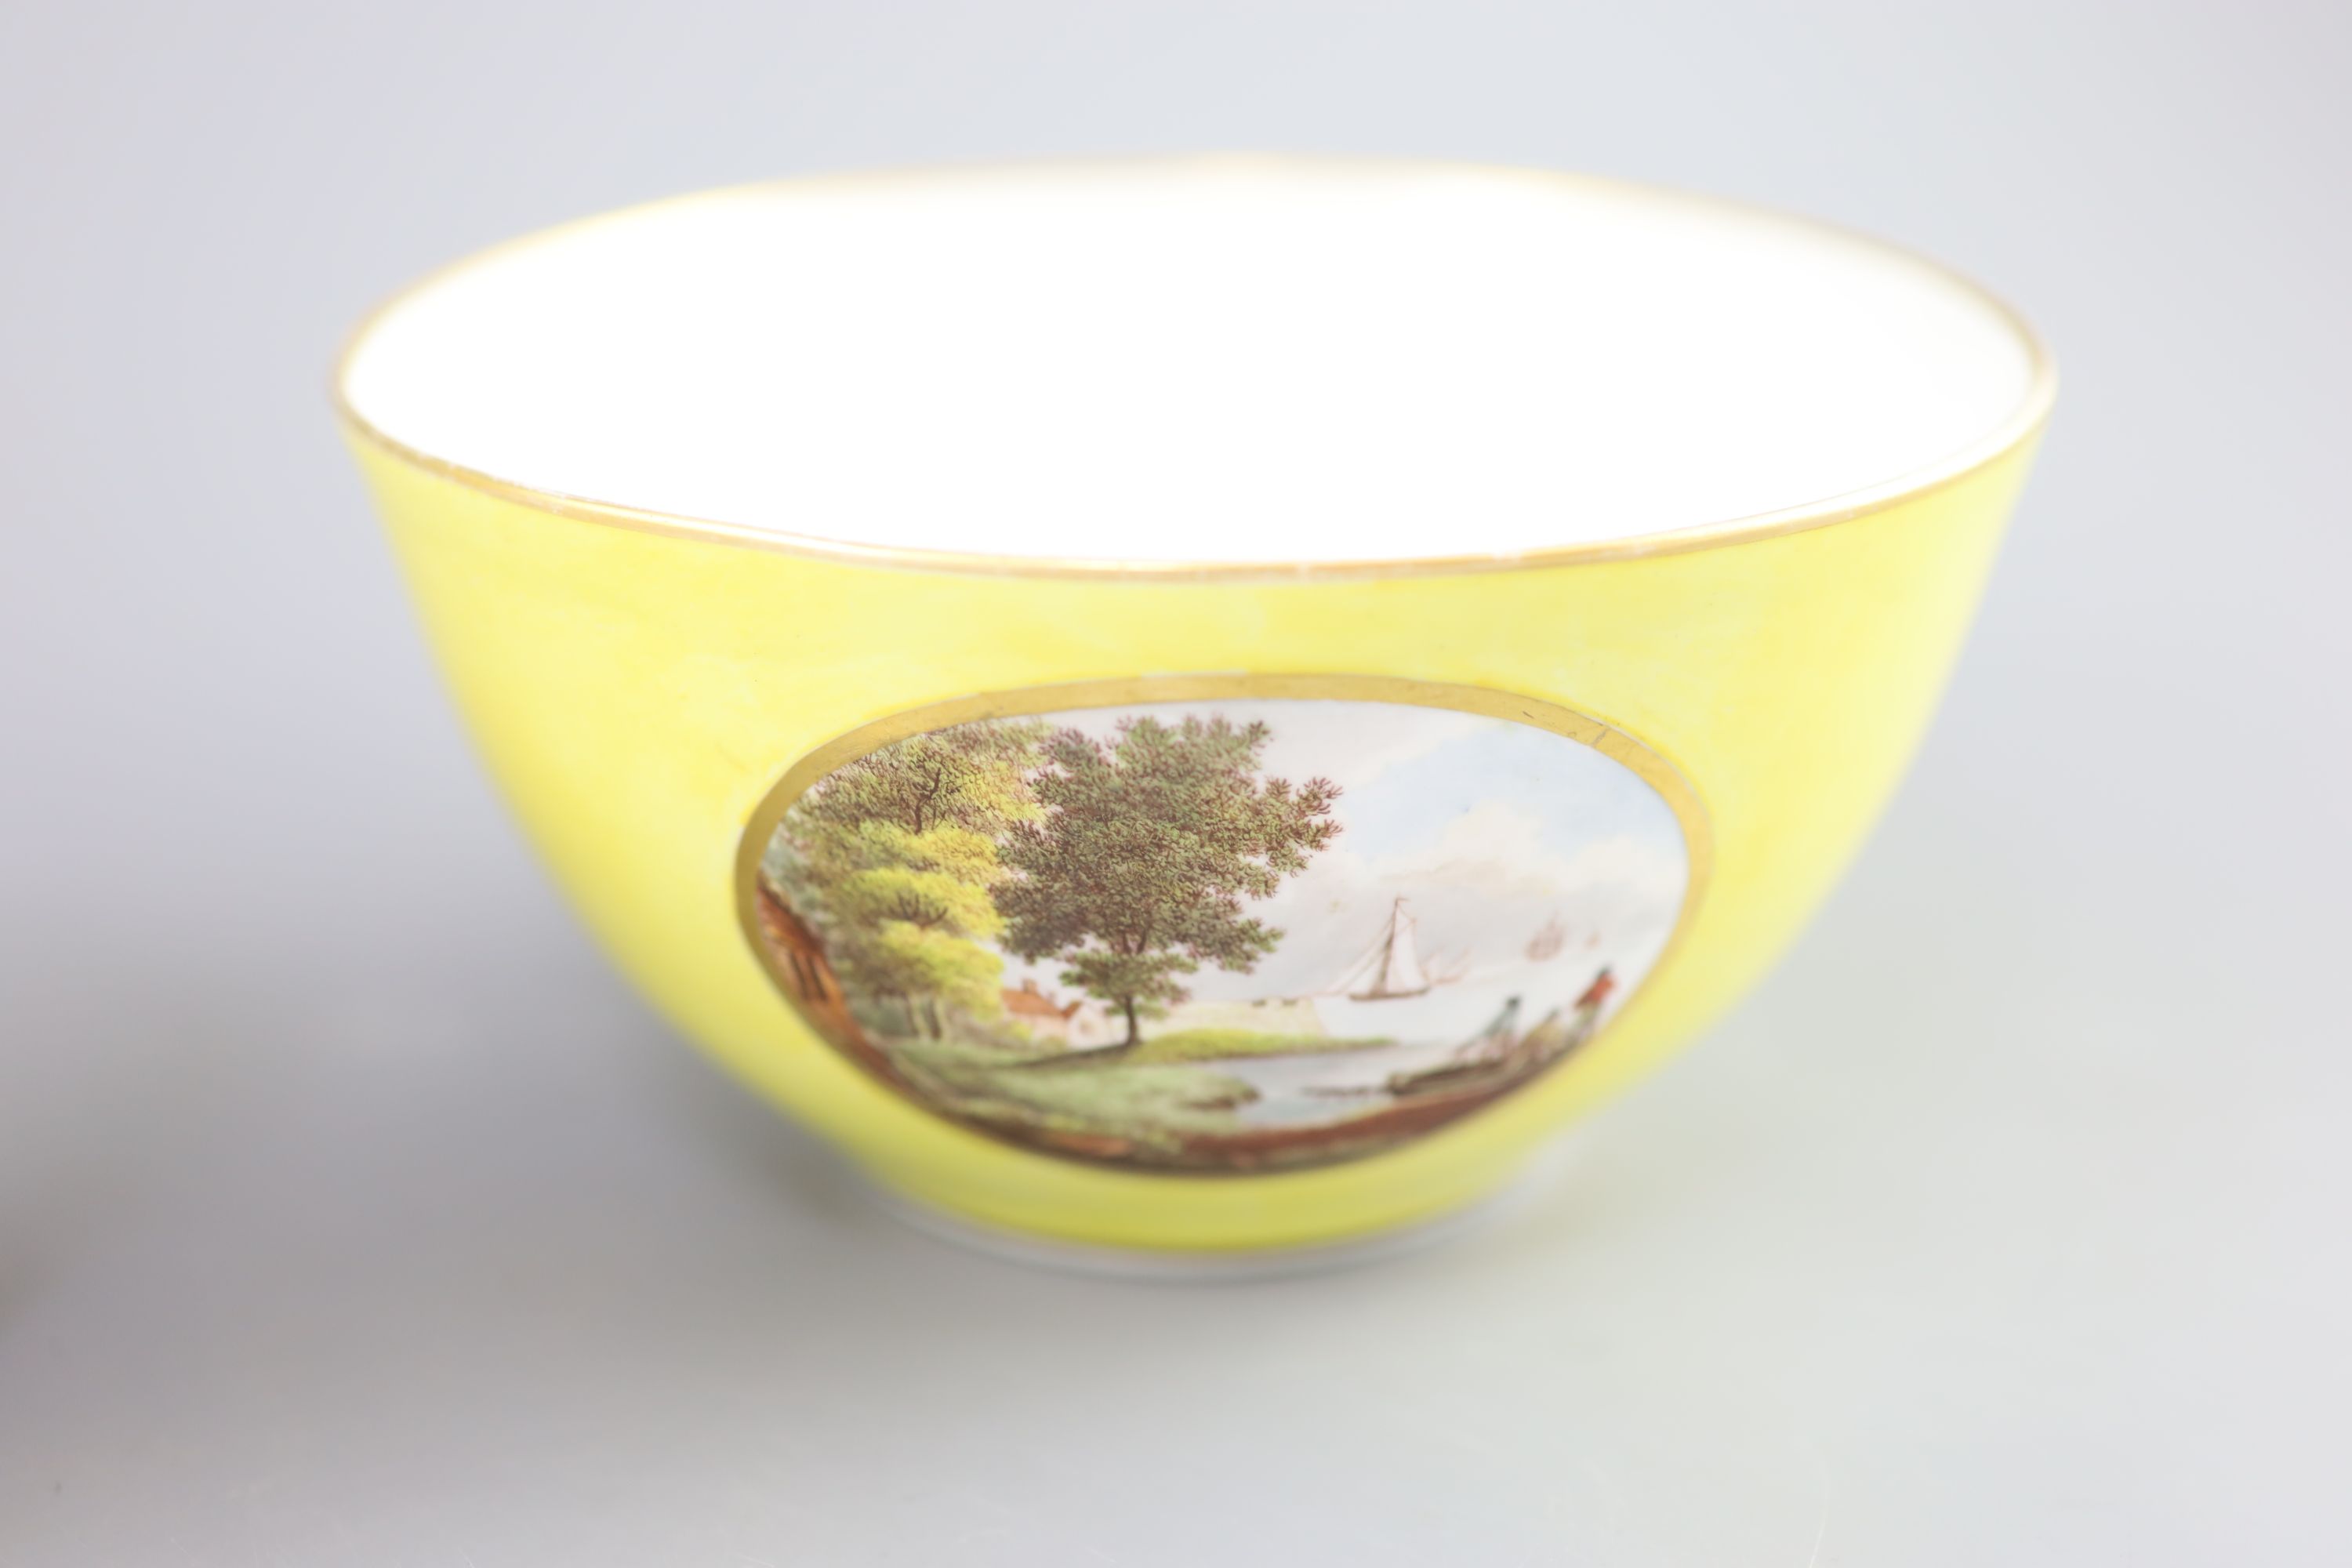 A Derby yellow ground topographical slops bowl and a similar bough pot, c.1790-1800, 19.5 cm wide